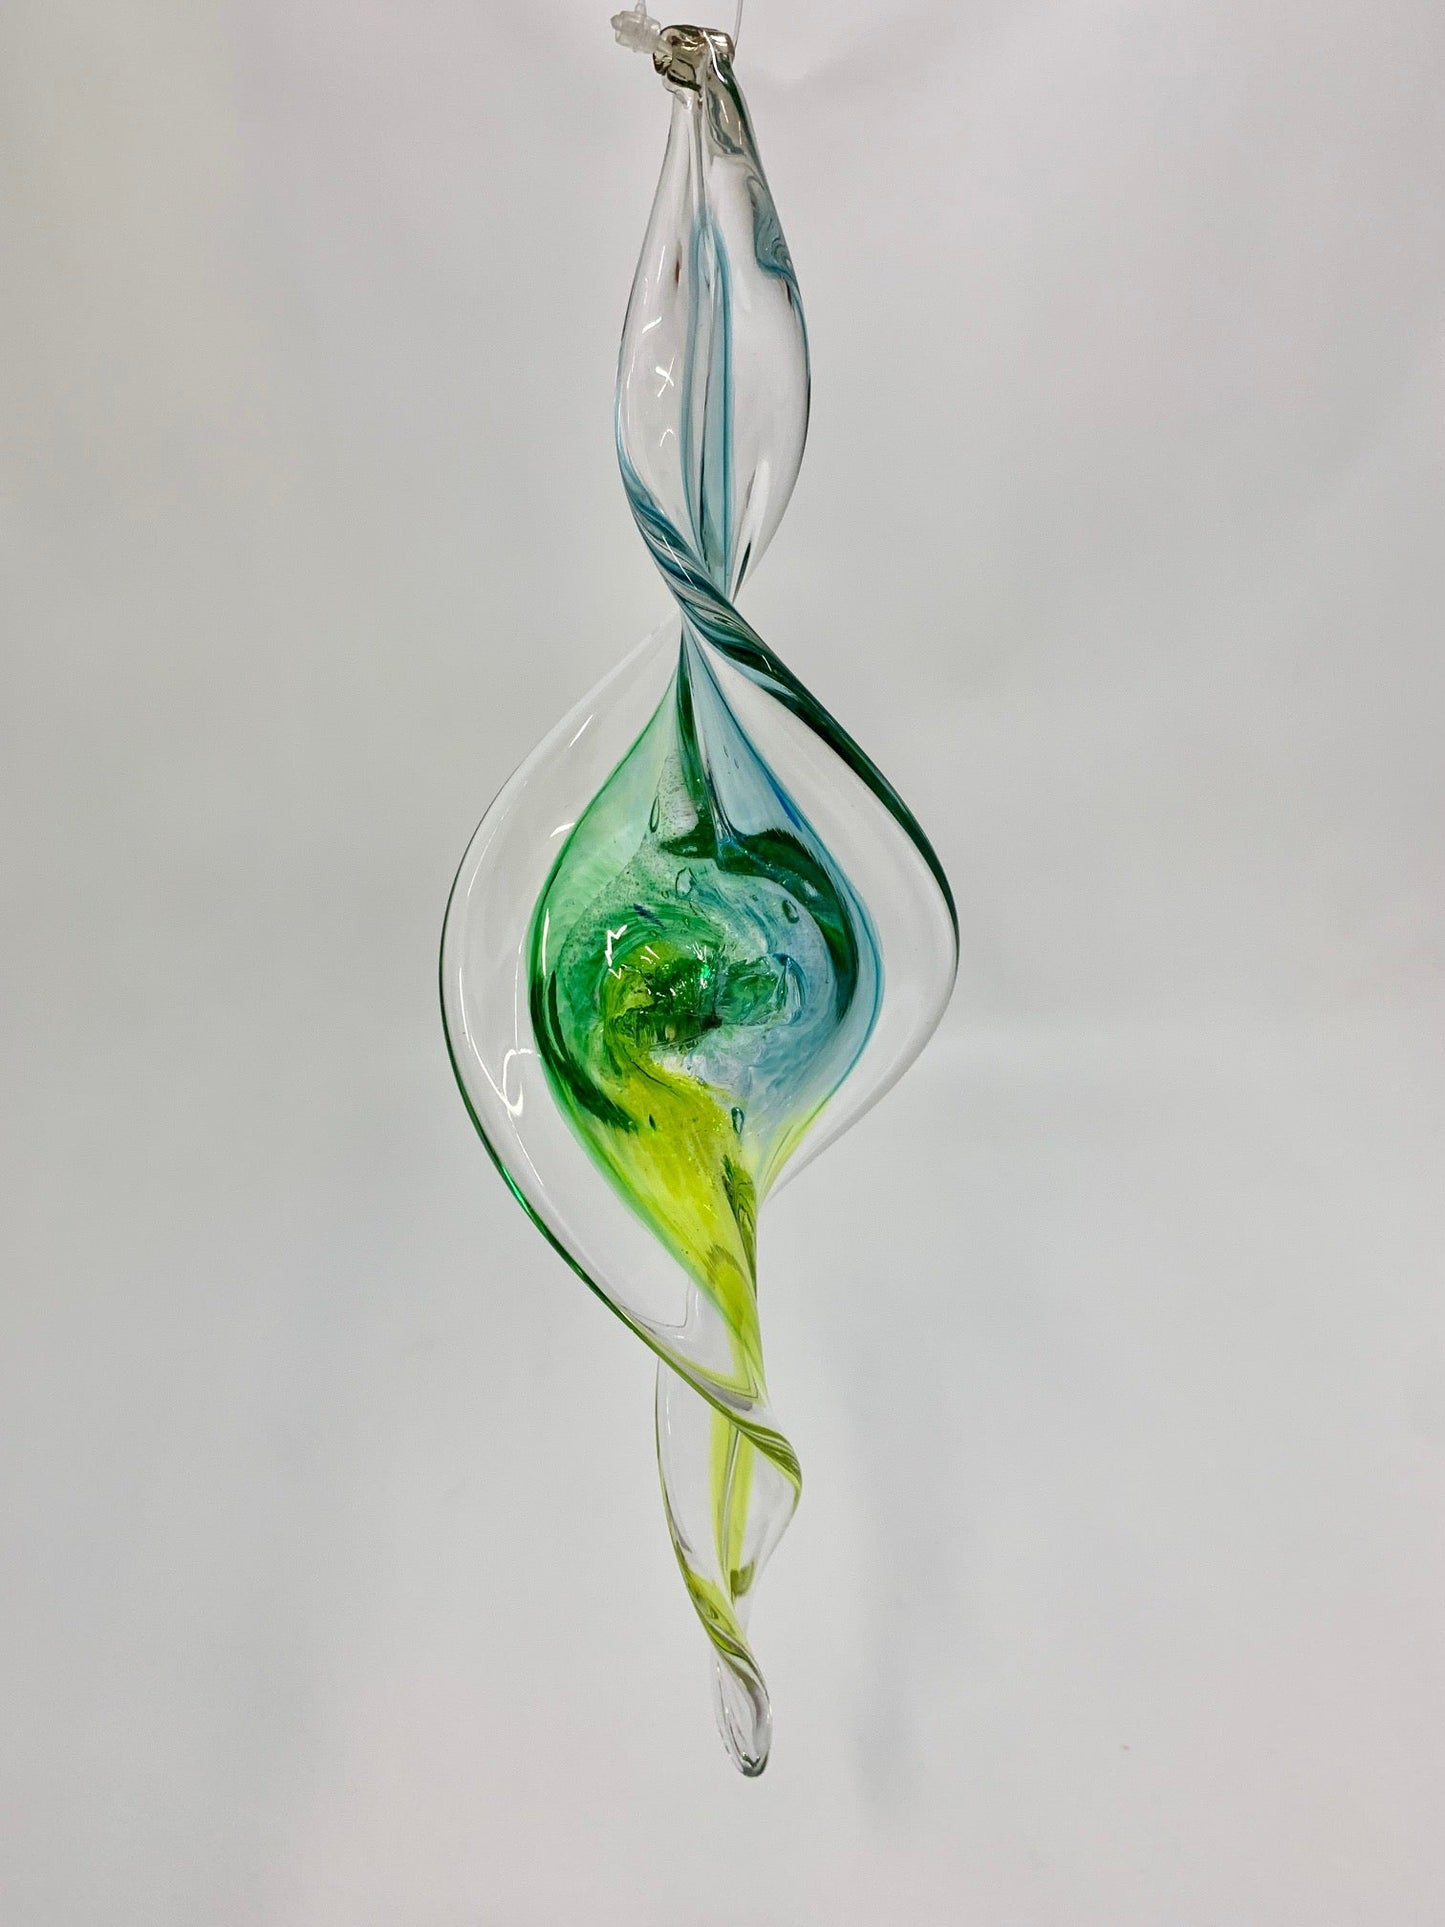 Large Spiral Twis🎨 Glass🎨 Buy Art at Carolina Creations Gallery in Downtown New Bern🎨